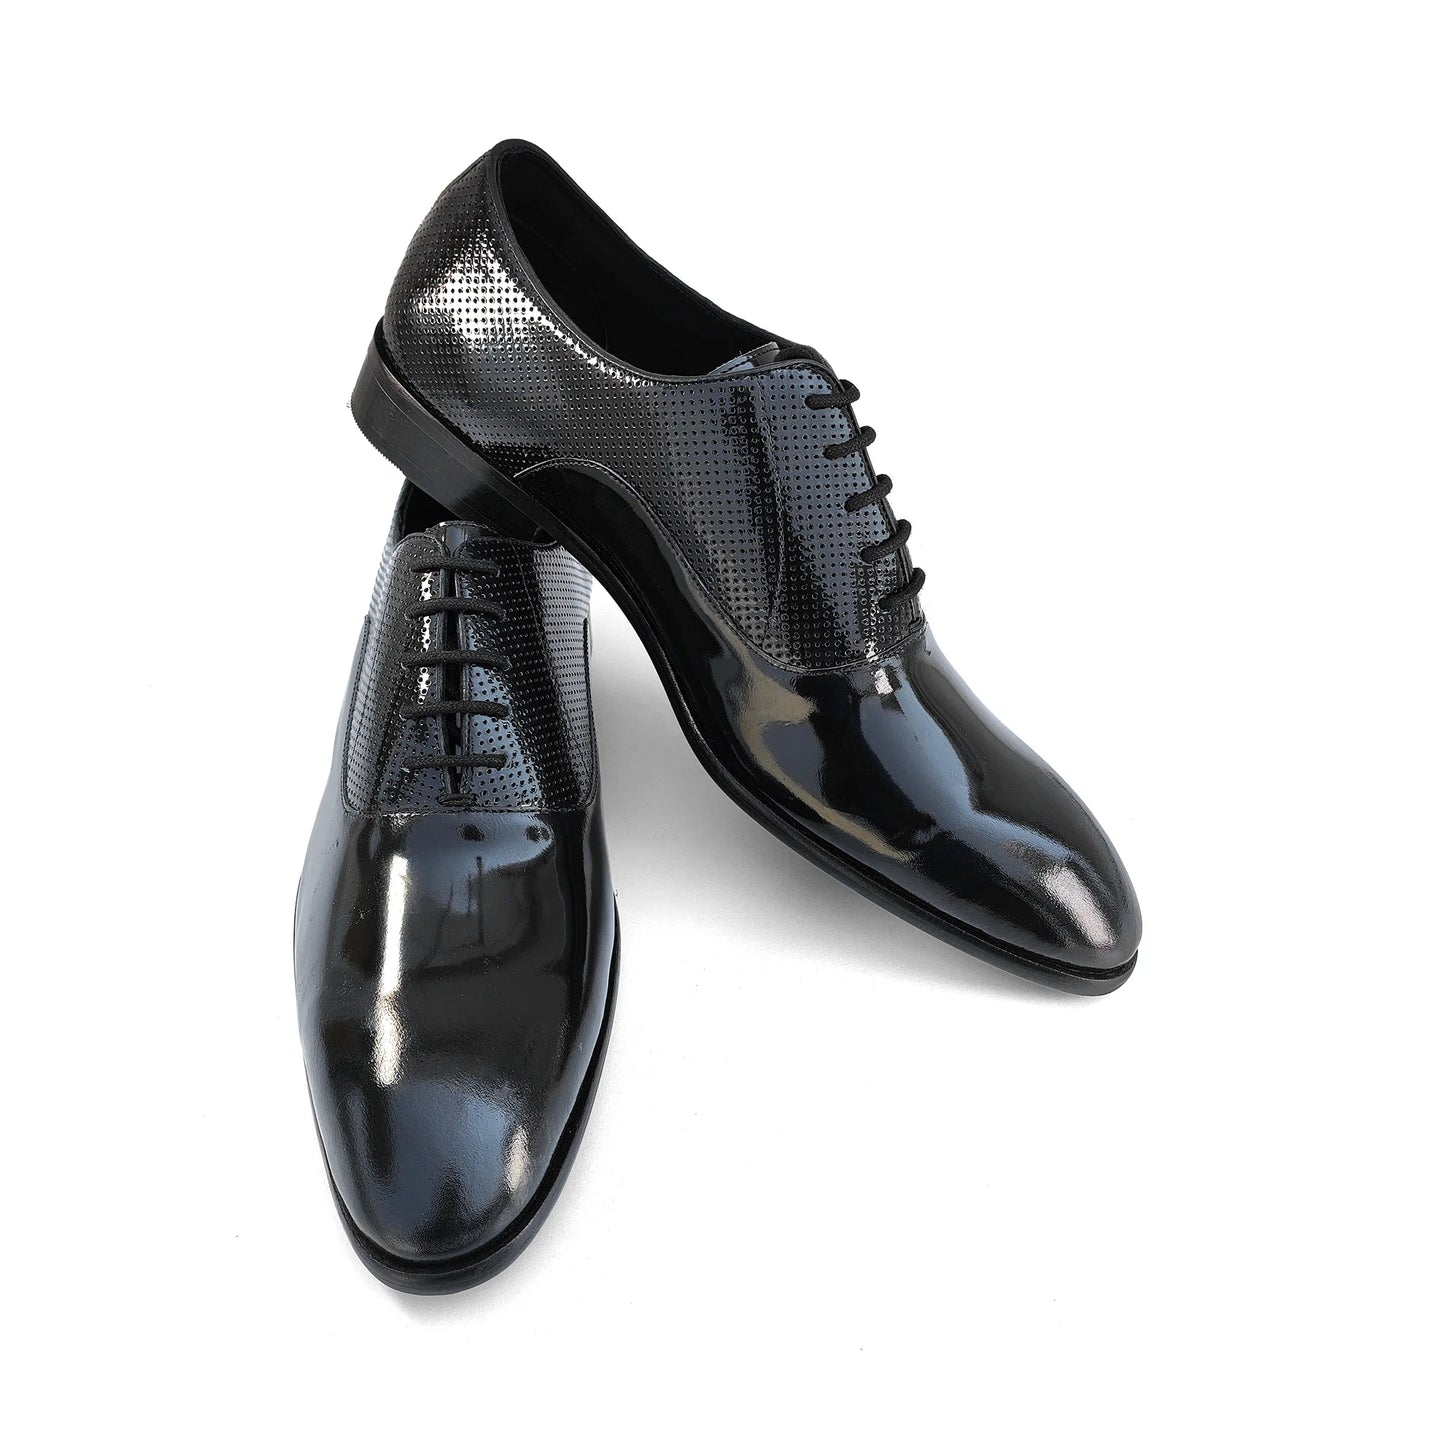 Solaz Black Patent Dress Oxford Shoes Made of Real Leather for Men